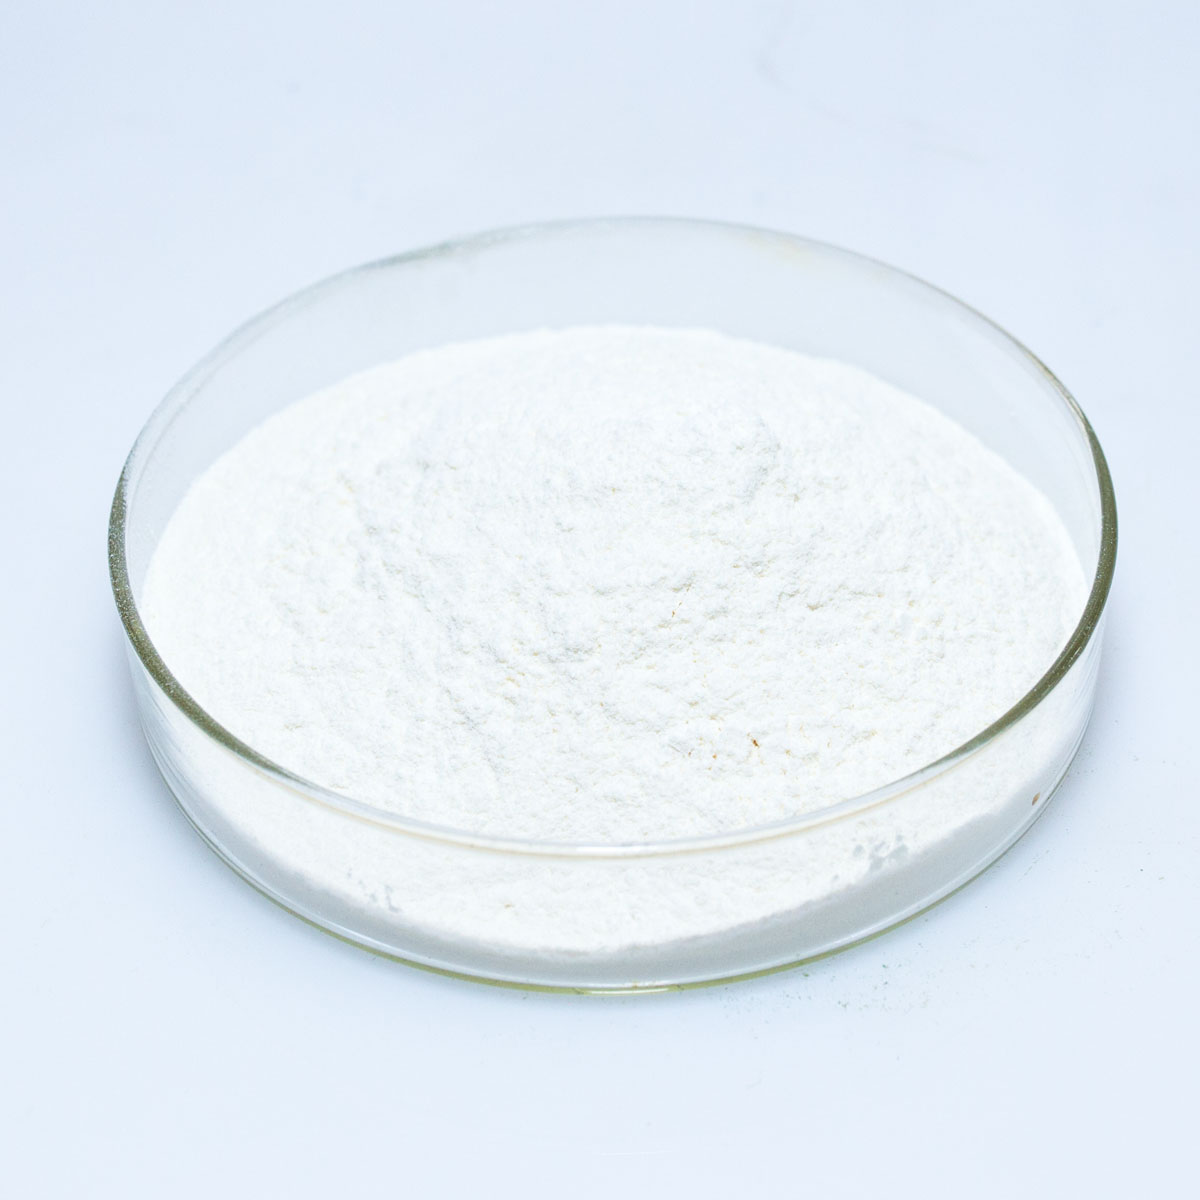 Product Name
Chondroitin sulfate
Appearance
White powder
Specifications
85%-95%
Test Method
HPLC
Grade
Food Grade,Pharm Grade
Certificate
ISO/HALAL/KOSHER
COA/MSDS/TDS
Available
Chondroitin Sulfate Sodium is the sodium salt of the sulfated linear glycosaminoglycan obtained from bovine, porcine, or avian cartilages of healthy and domestic animals used for food by humans. 

Chondroitin is the tough connective tissue within joints and ginger helps to maintain mobility of joints.
MSM is a natural form of organic sulphur one of the major building blocks of glycosaminoglycans (key components of cartilage).